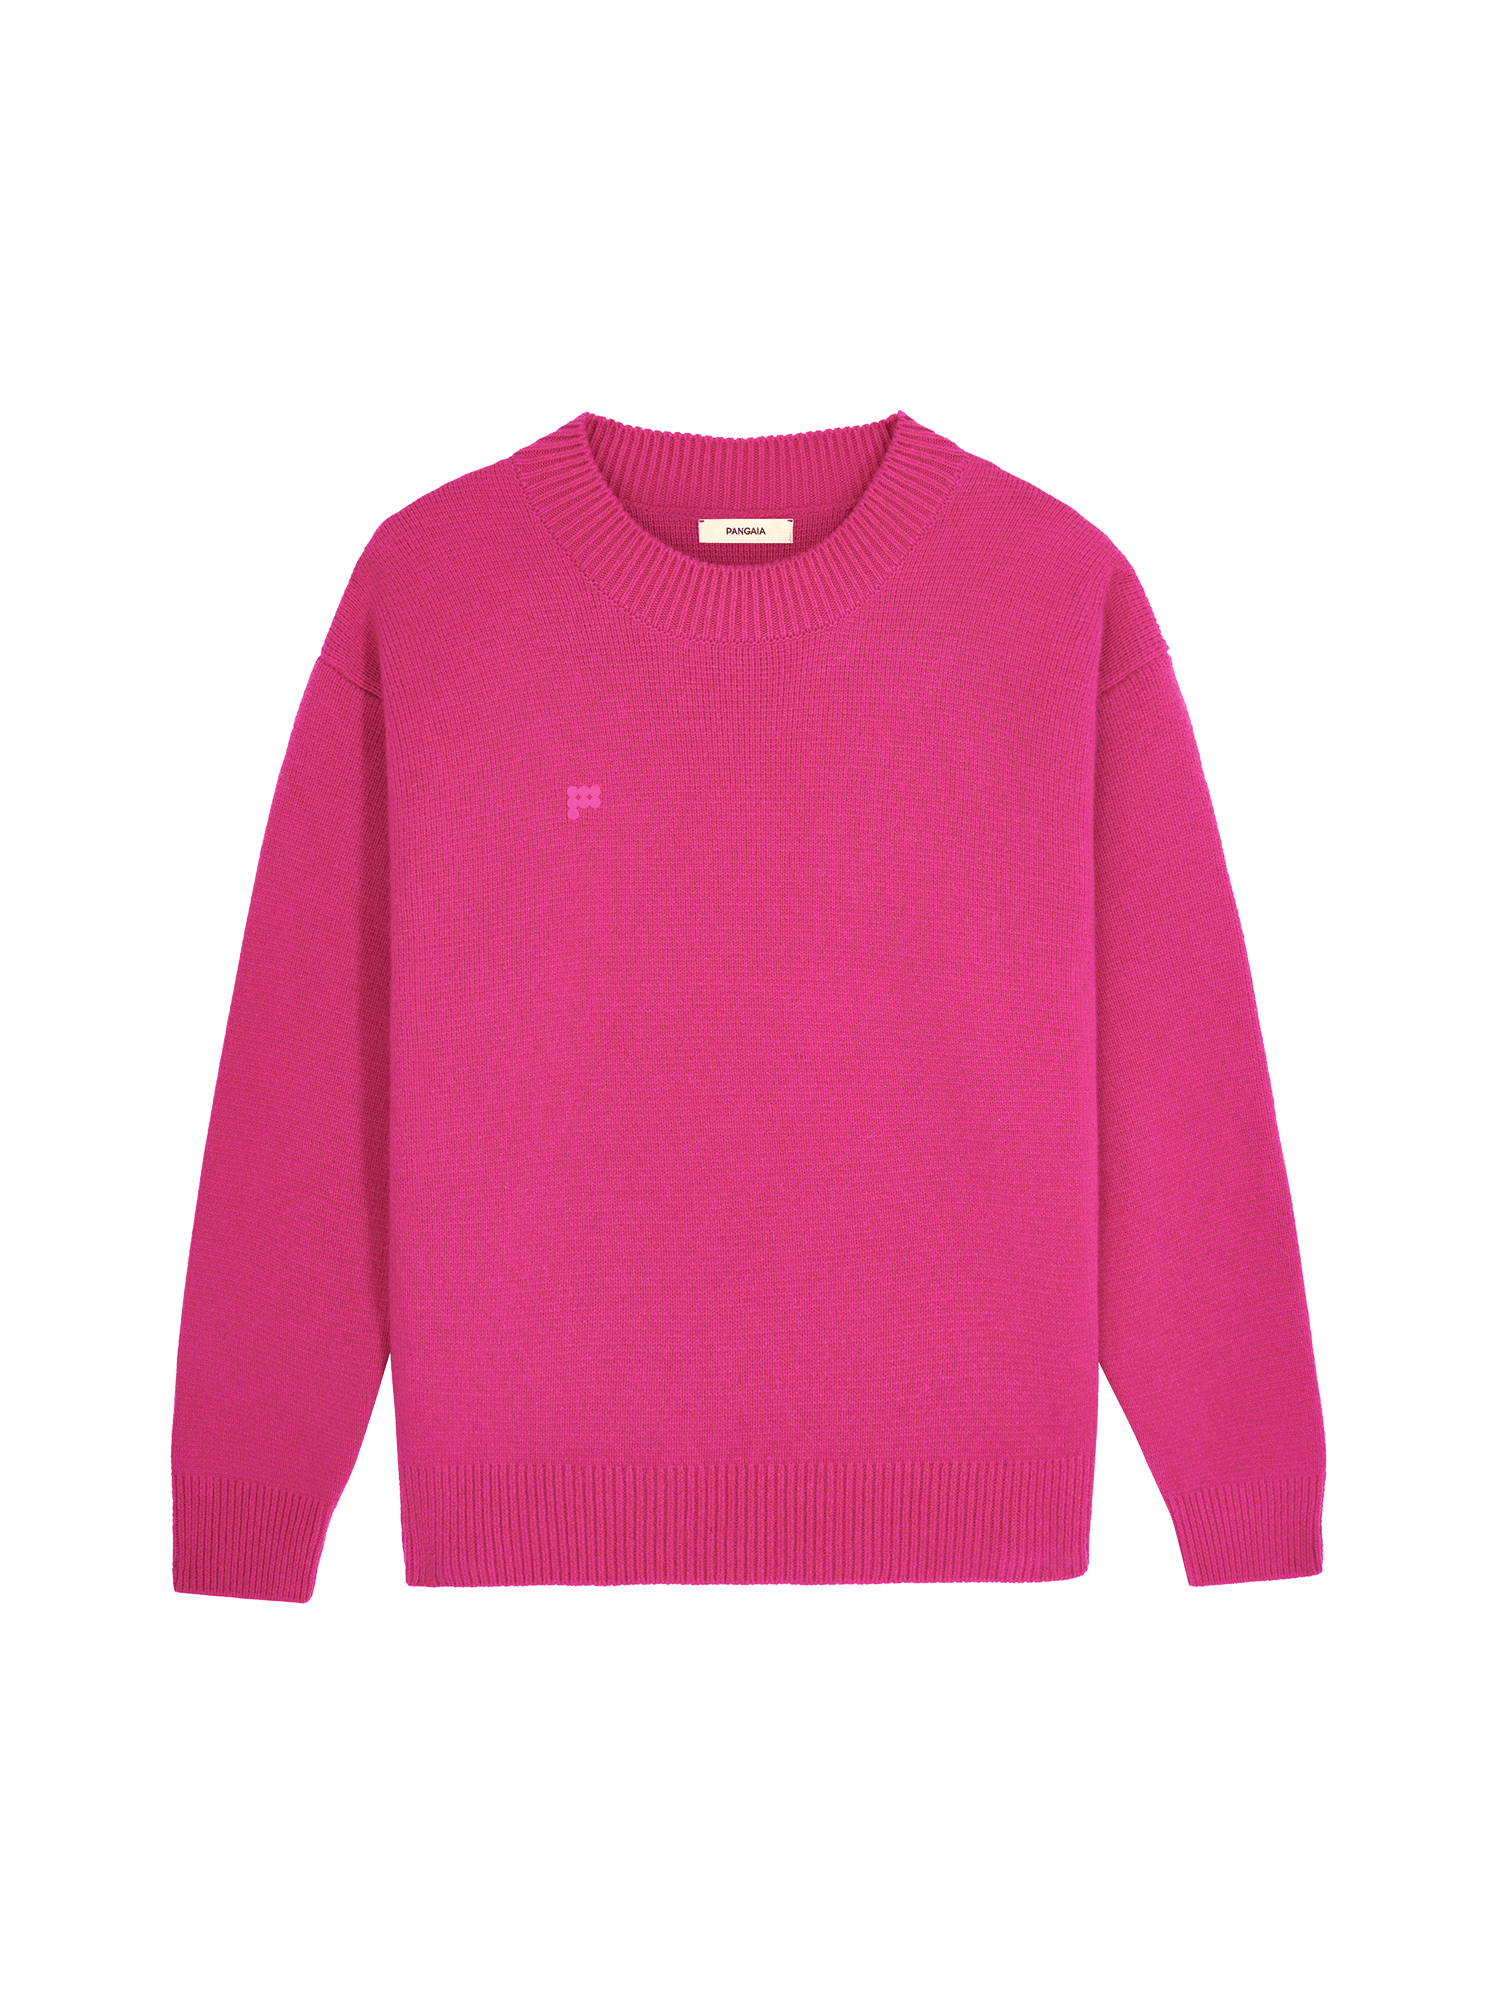 Womens_Recycled_Cashmere_Knit_Crew_Neck_Sweater_Tourmaline_Pink-packshot-2